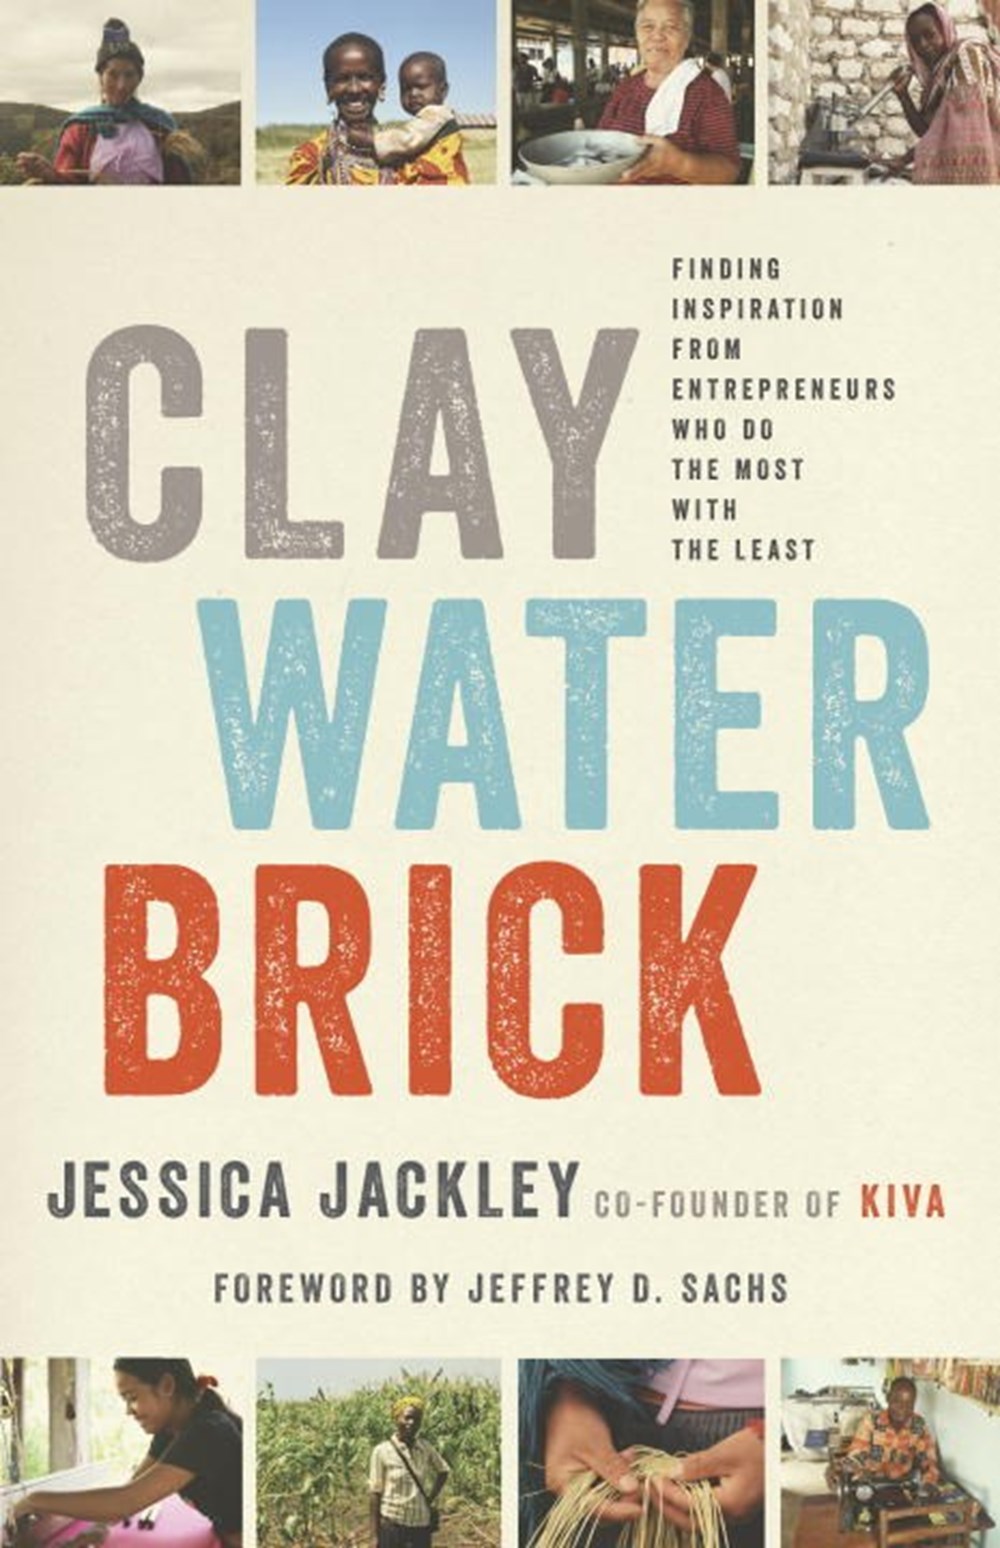 Clay Water Brick Finding Inspiration from Entrepreneurs Who Do the Most with the Least